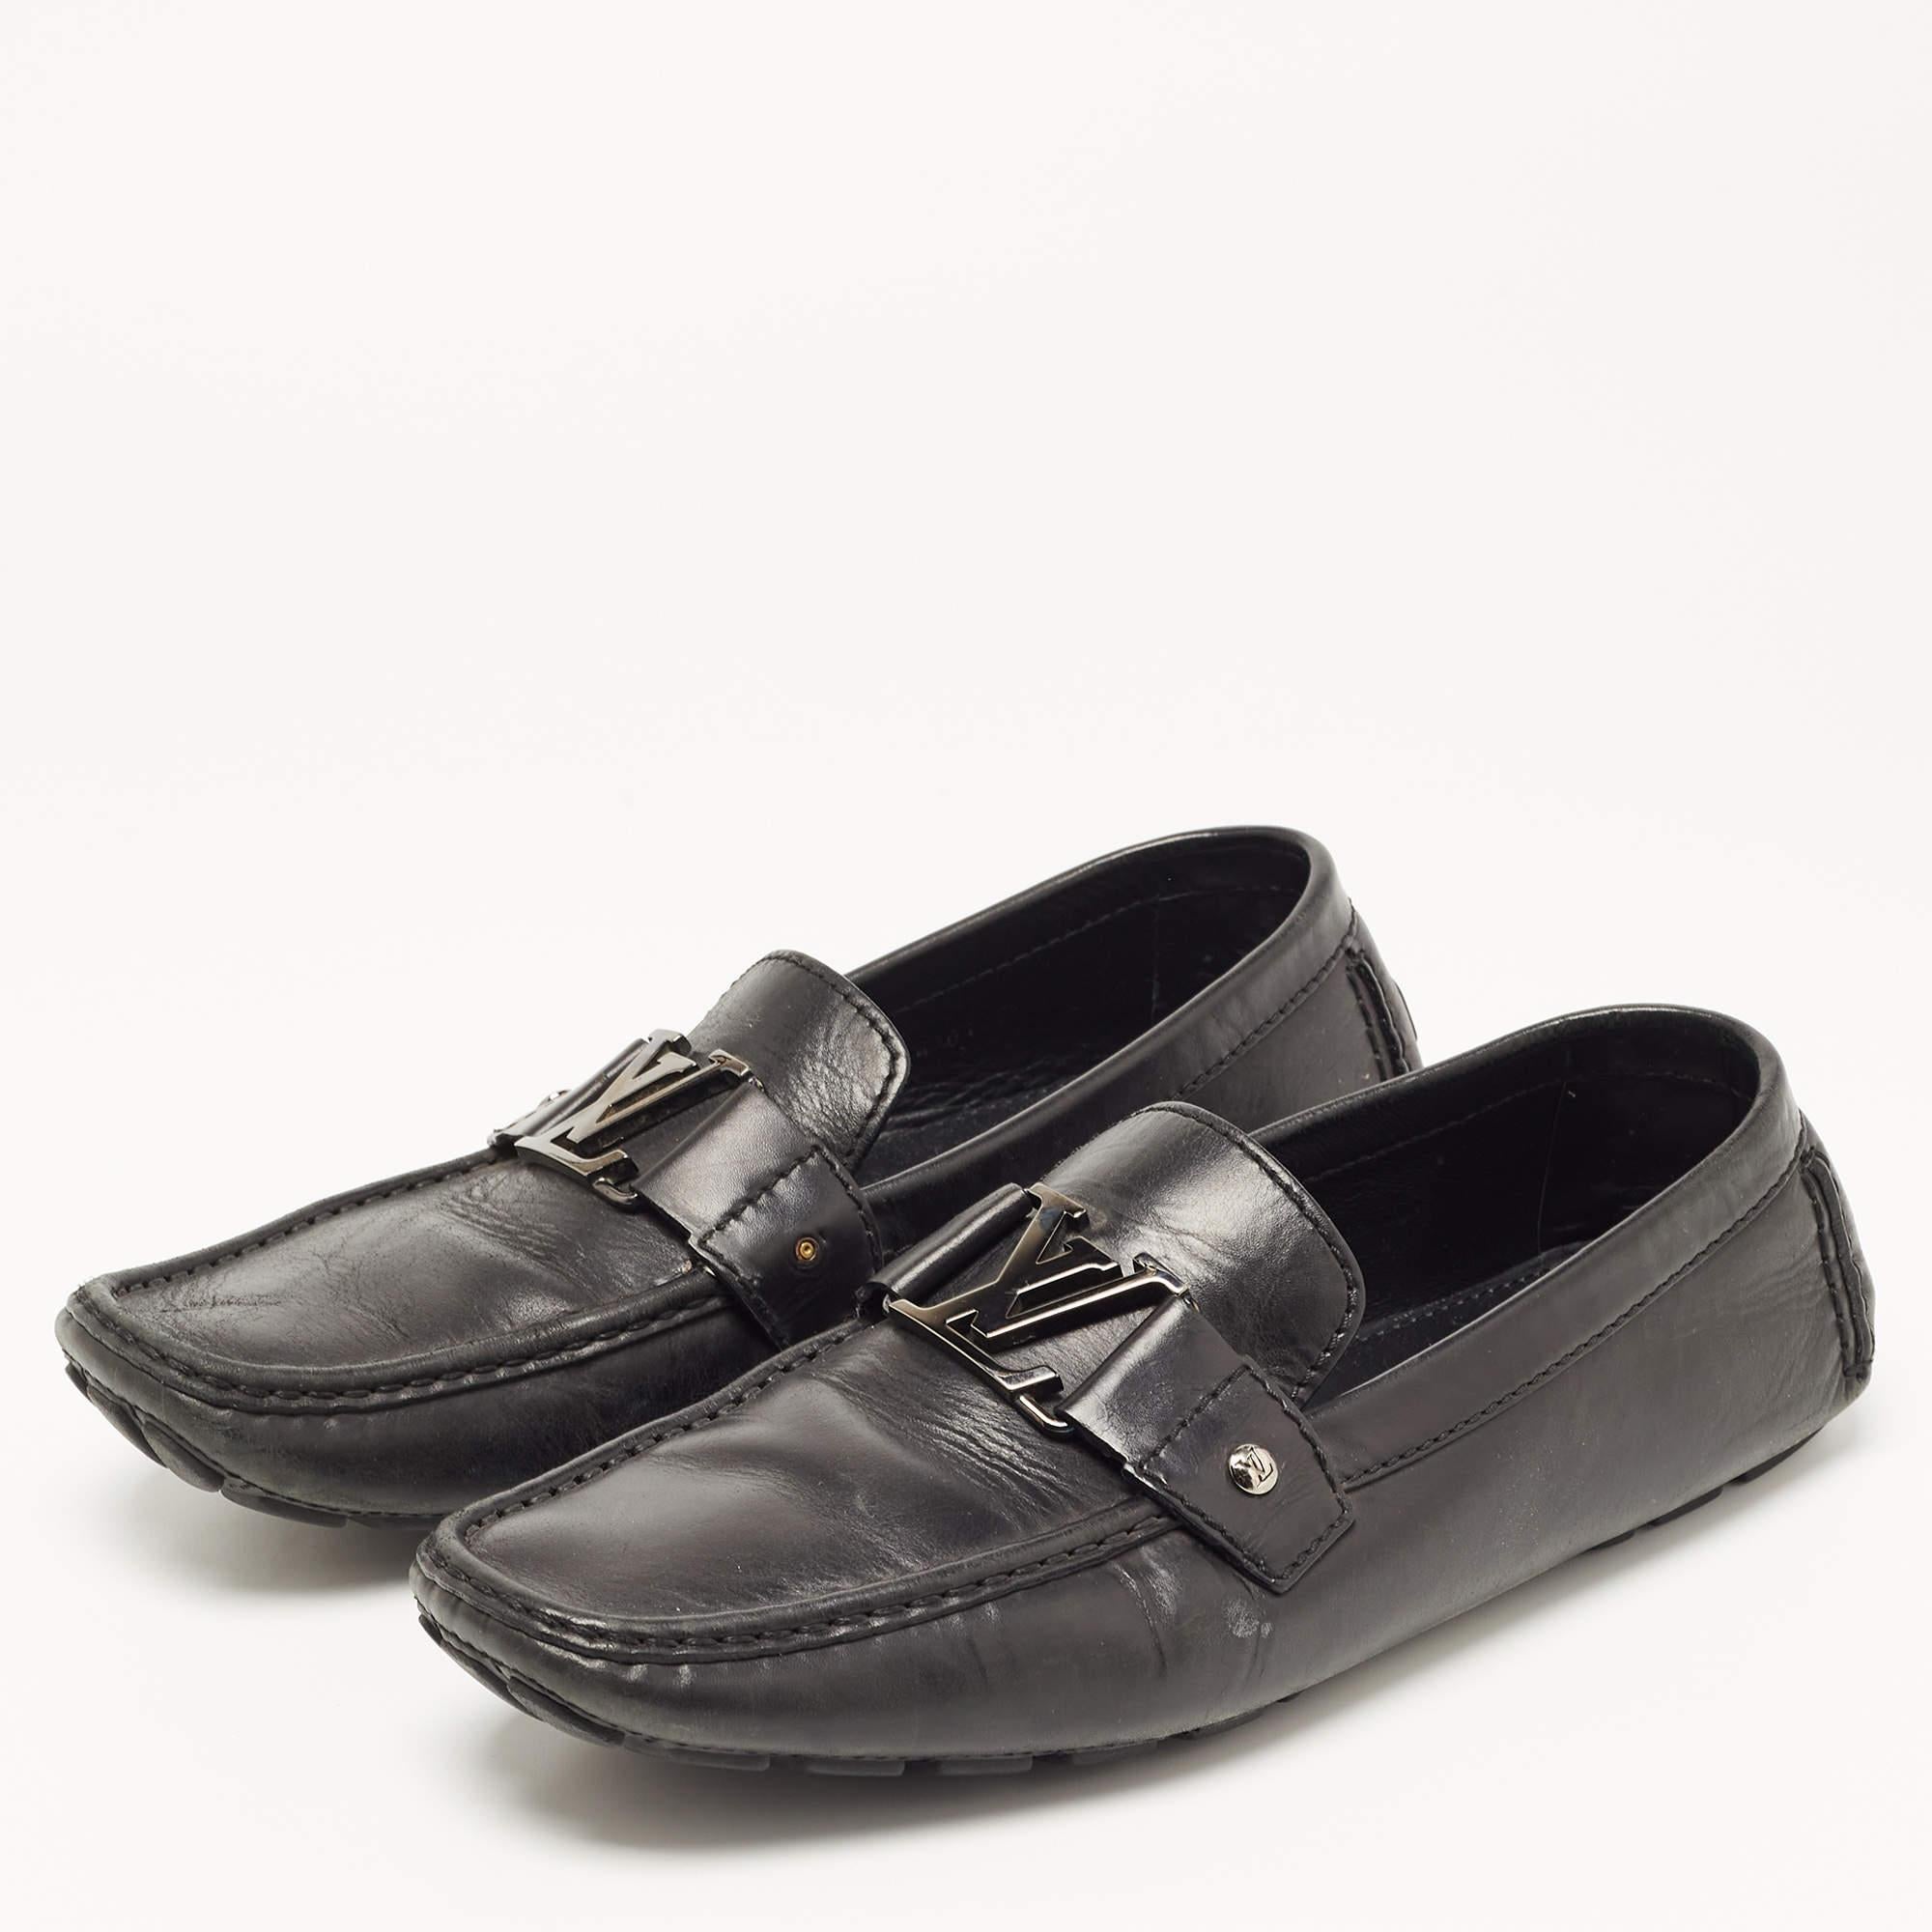 Practical, fashionable, and durable—these designer loafers are carefully built to be fine companions to your everyday style. They come made using the best materials to be a prized buy.

Includes: Original Dustbag, Original Box, Info Booklet